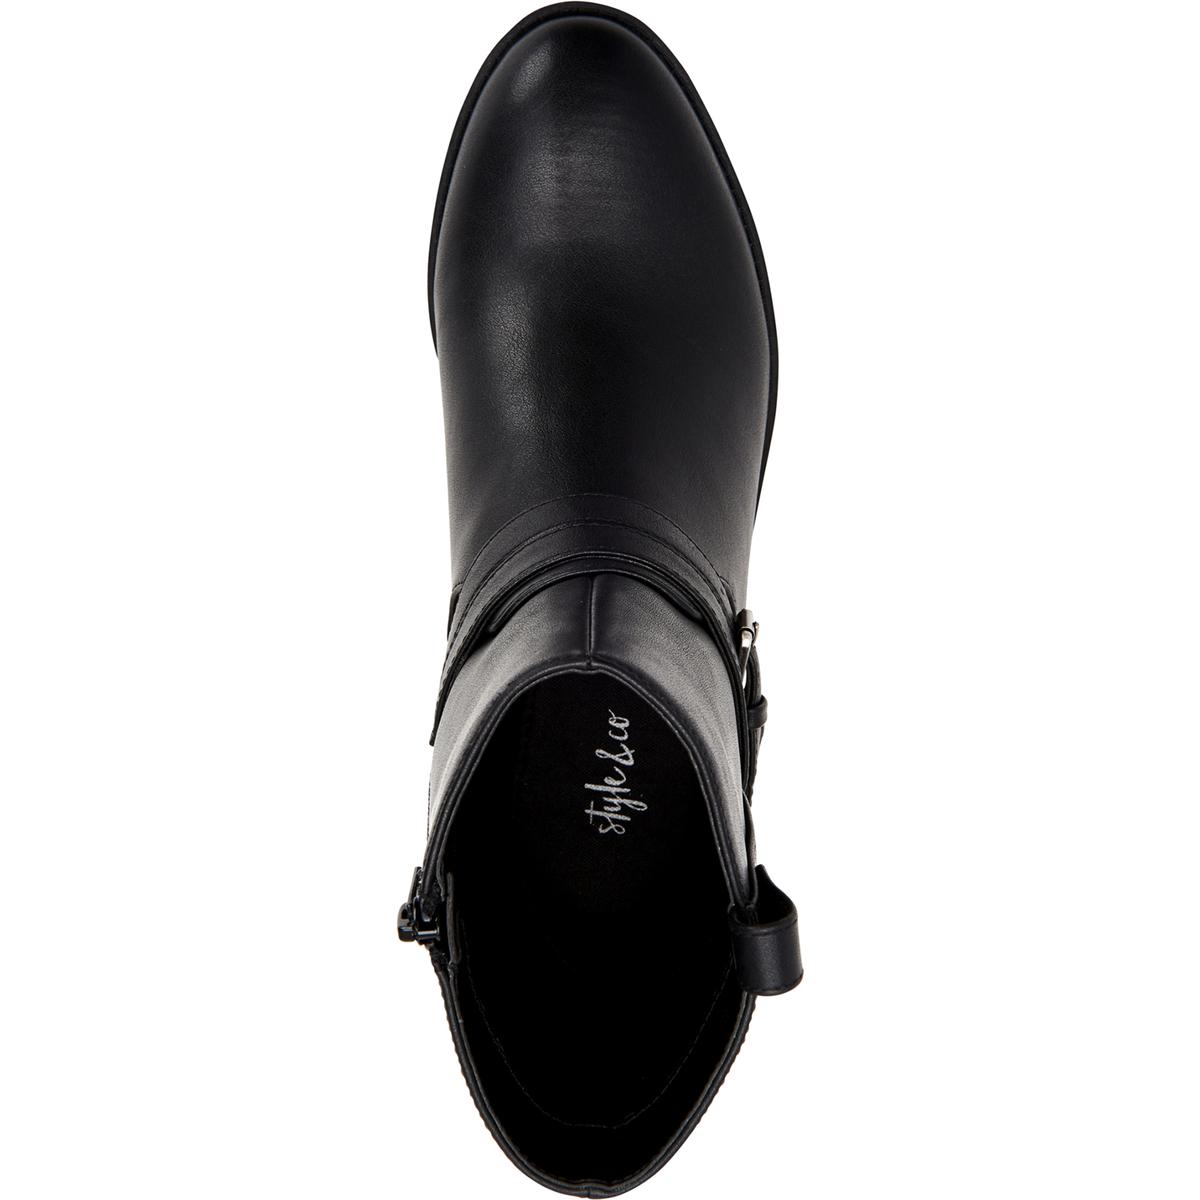 Womens State Faux Leather Flat Ankle Booties Shoes BHFO 0946 Style & Co 